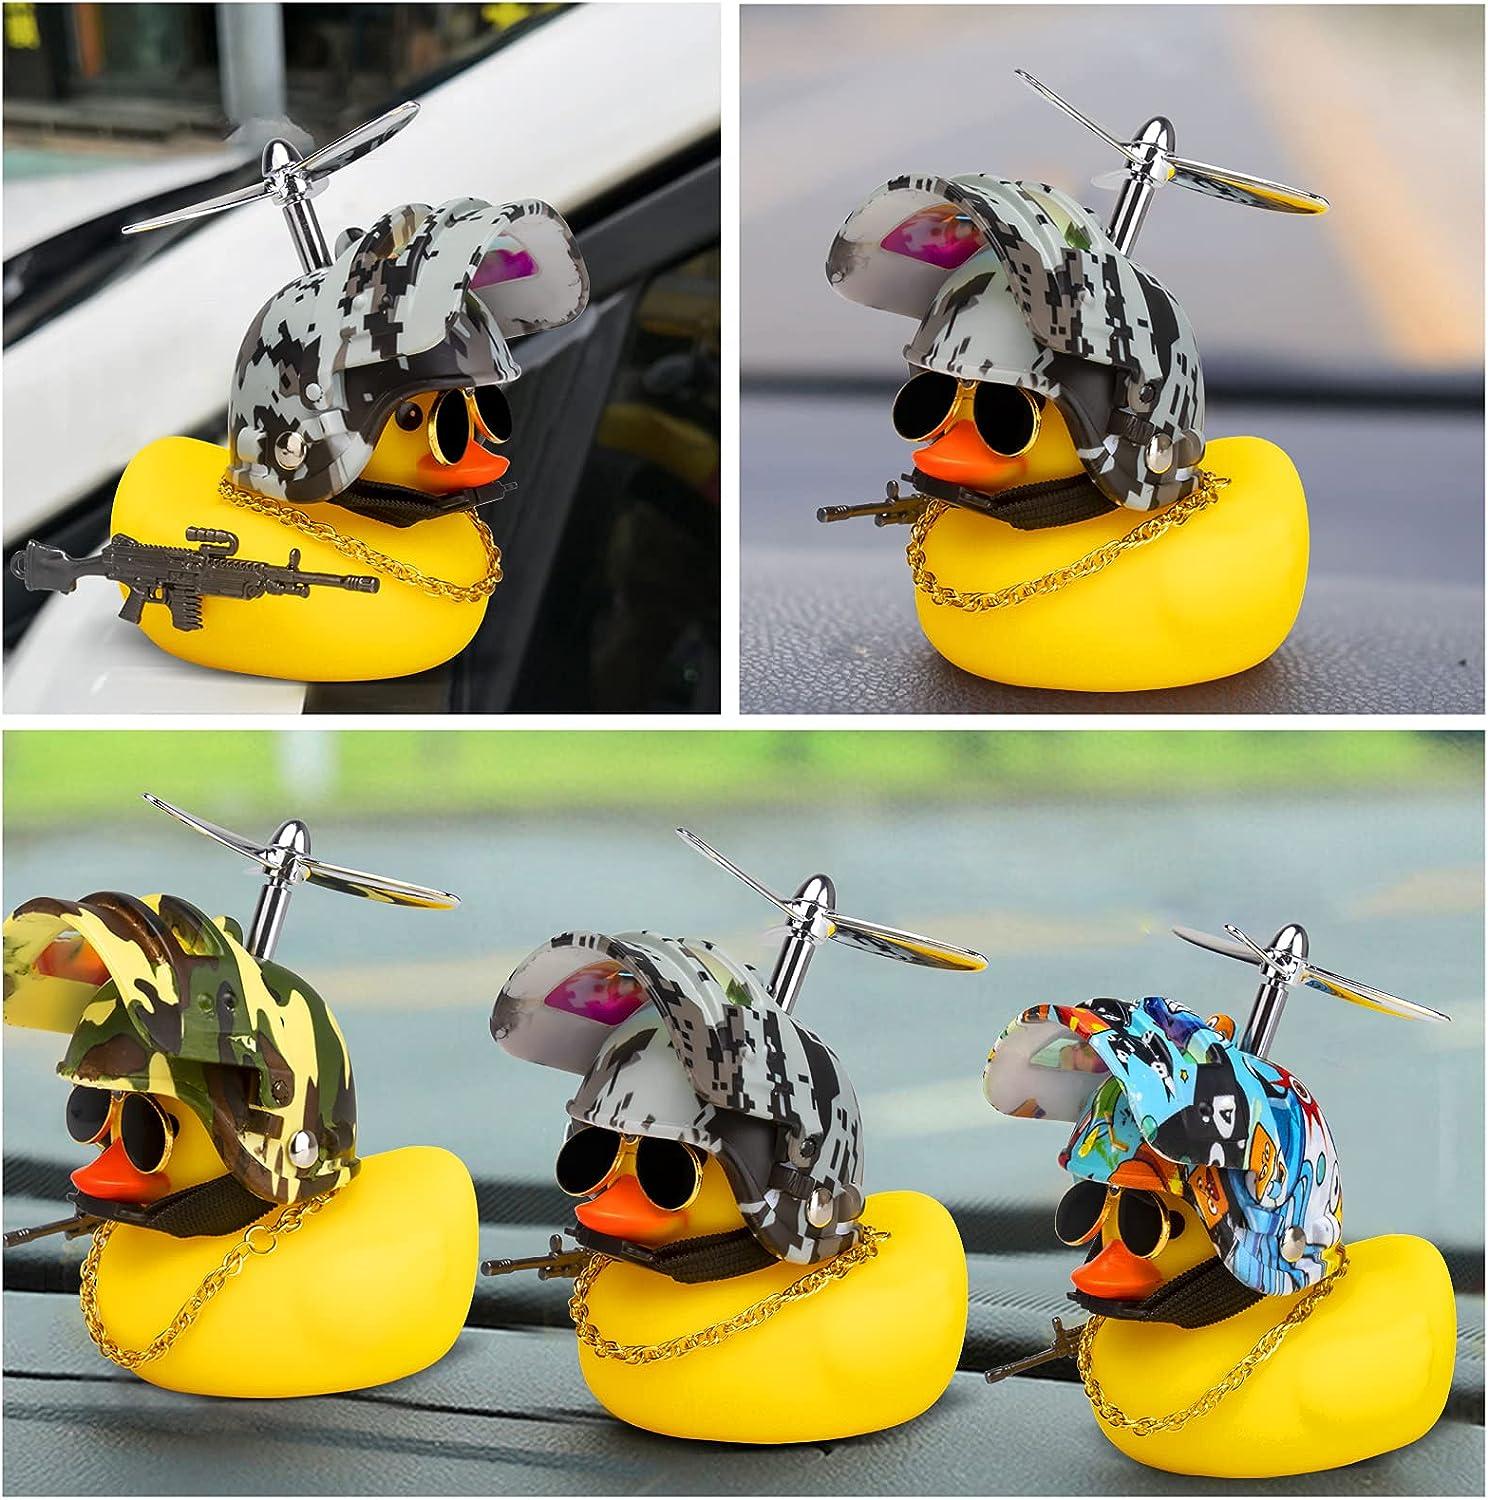 wonuu Rubber Duck Car Ornaments, Squeeze Duck Dashboard Decorations Kids  Bicycle Decor for Cycling Motorcycle & Bicycle Accessories Decorations  Digital Camo-L&G